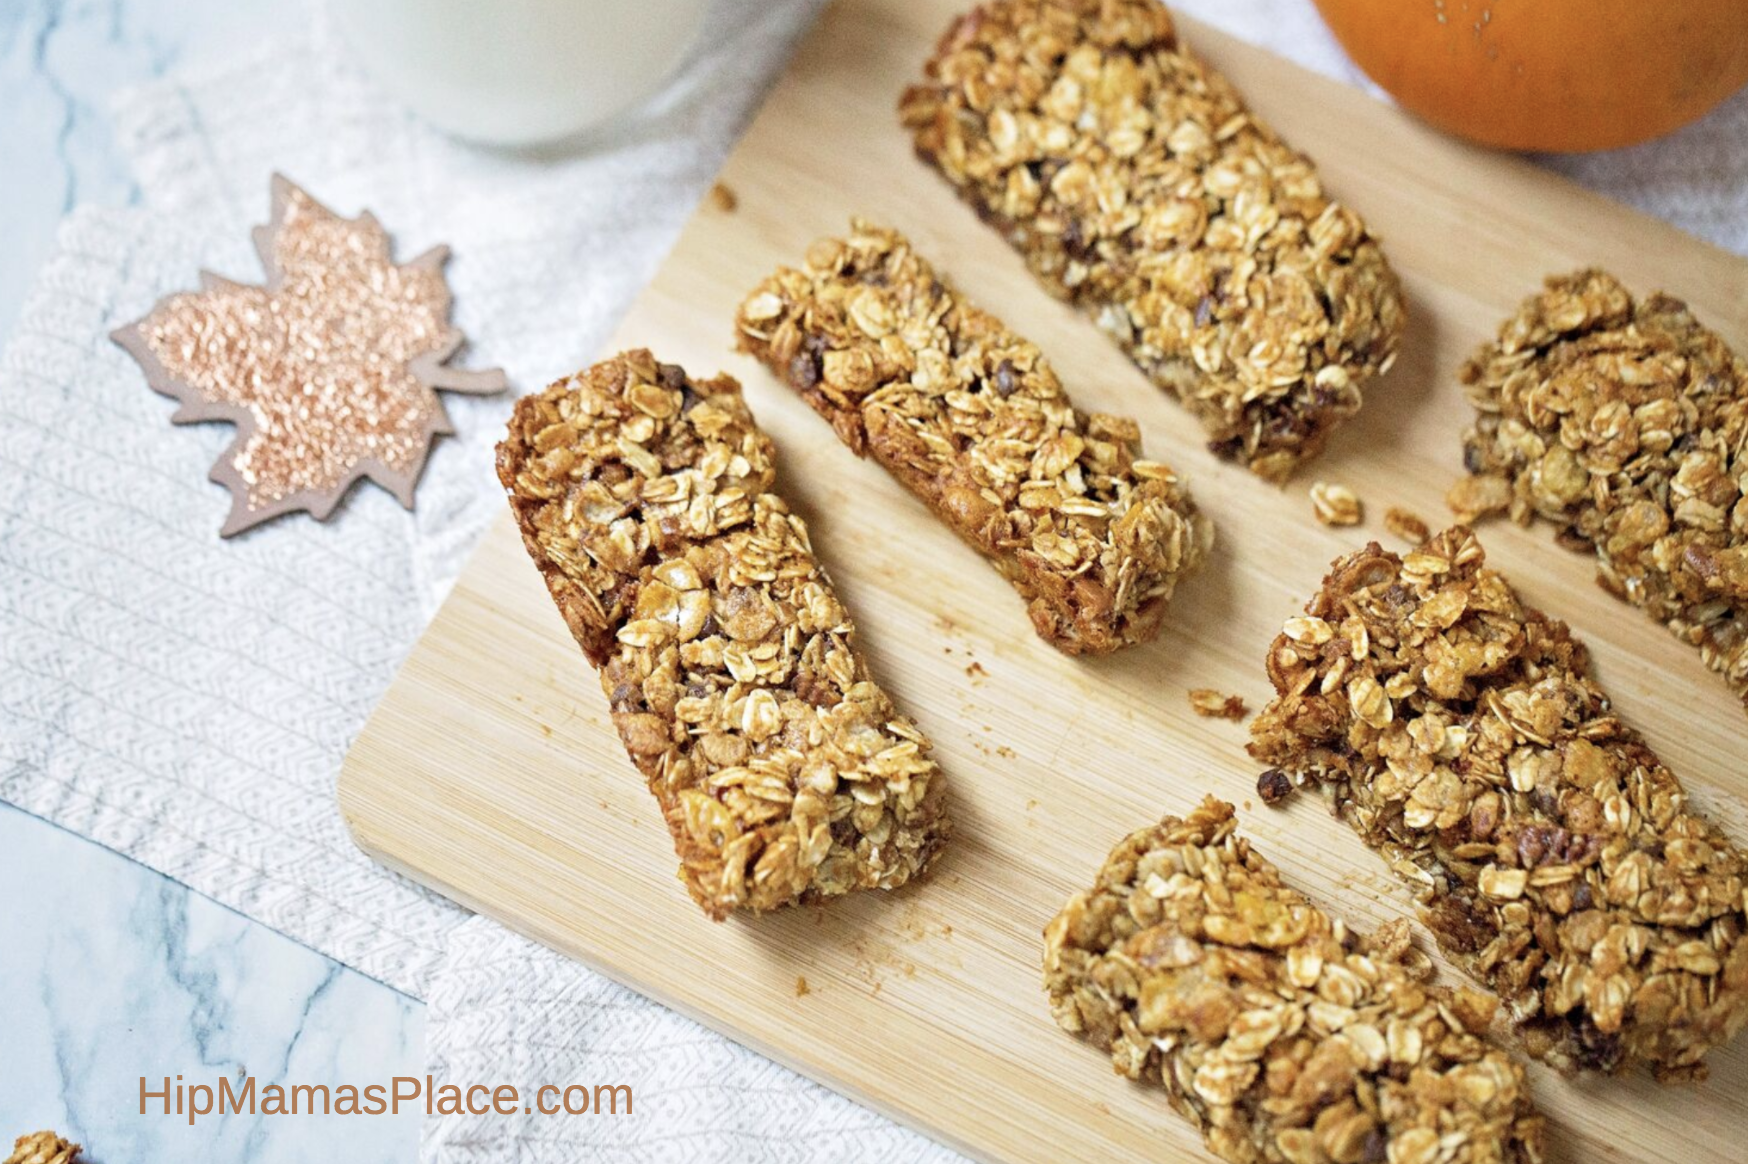 Fall is here! Make these easy and delicious Pumpkin-Almond Chocolate Chip Granola Bars! 